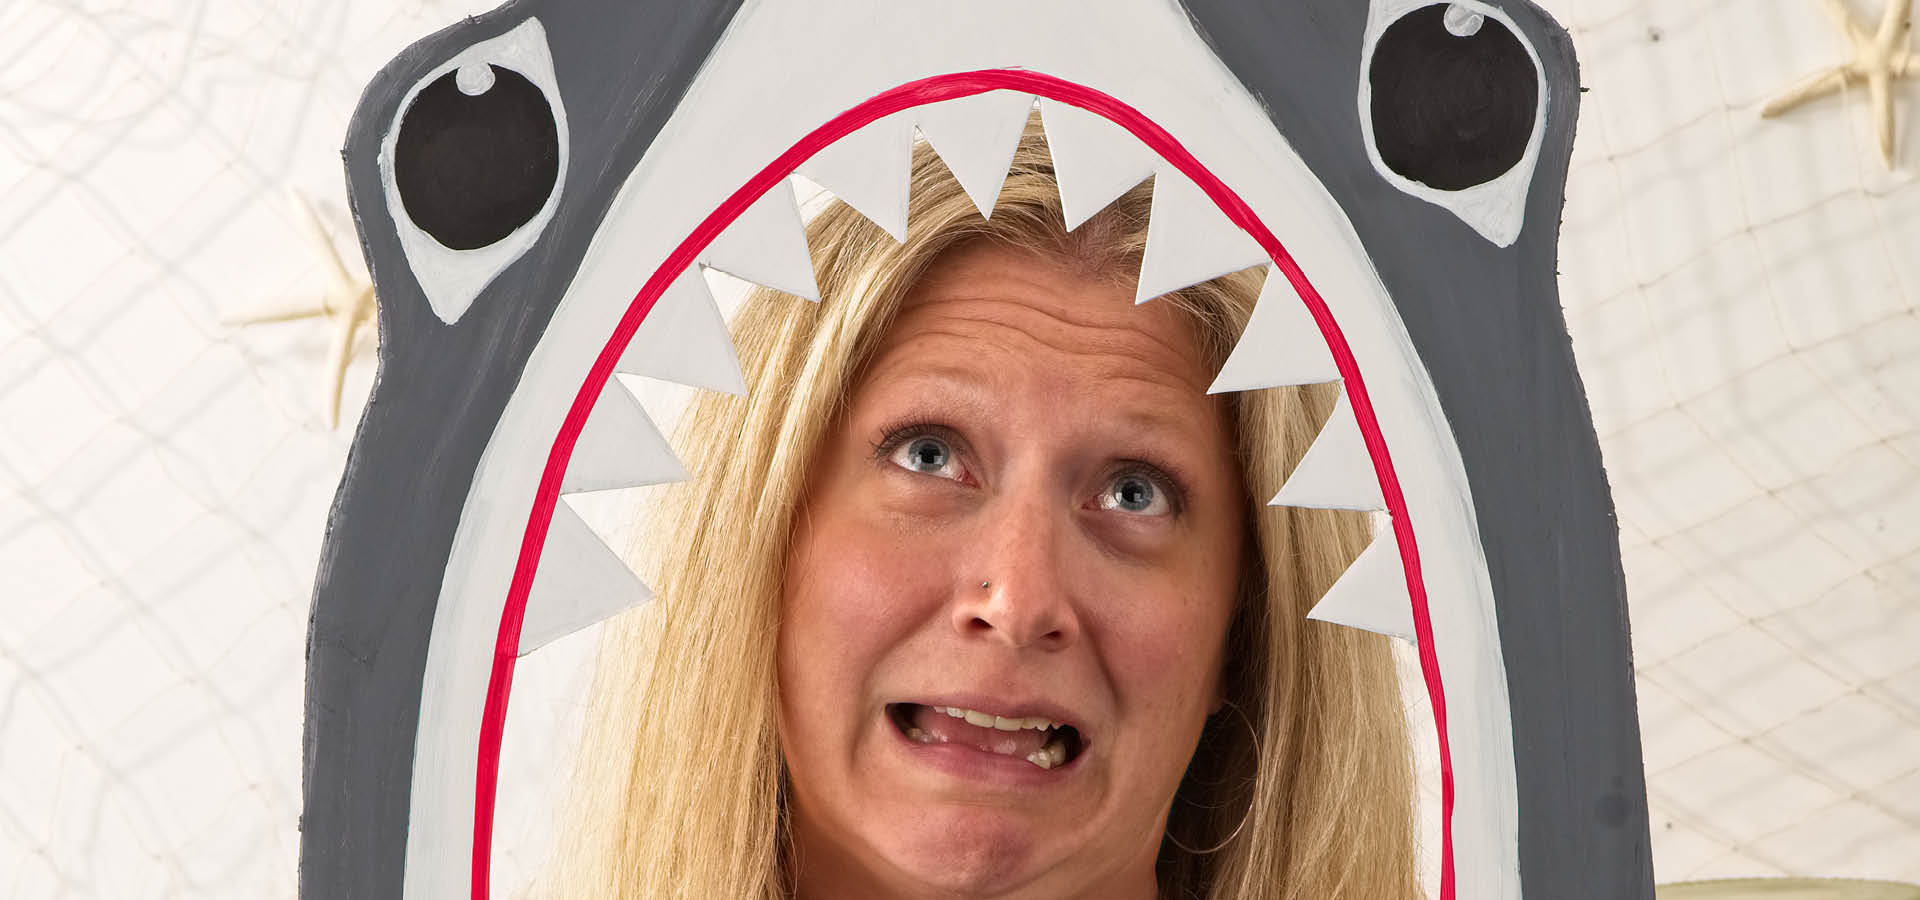 shark-tooth-photo-booth